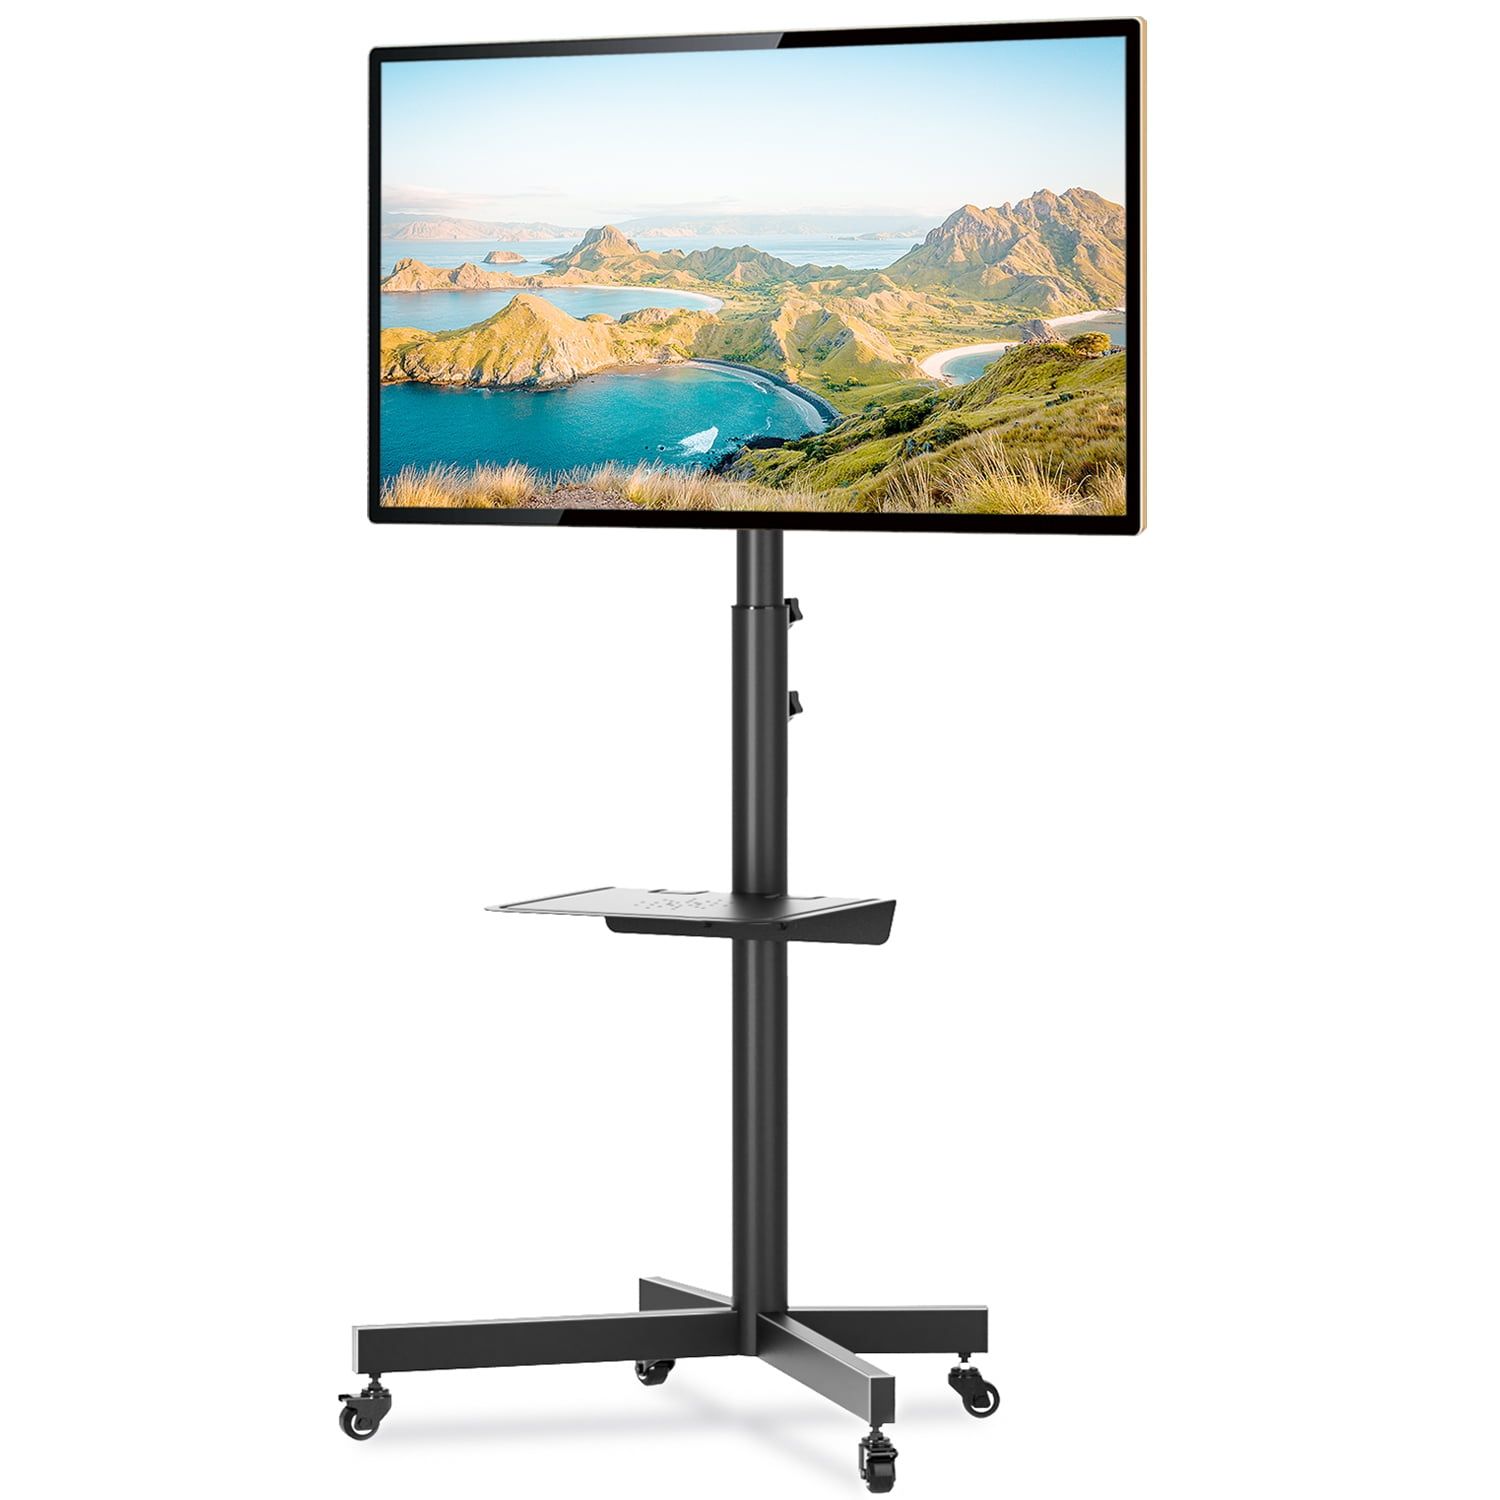 Rfiver Black Mobile Tv Cart Rolling Stand With Mount For 32" To 60 Pertaining To Mobile Tilt Rolling Tv Stands (View 6 of 20)